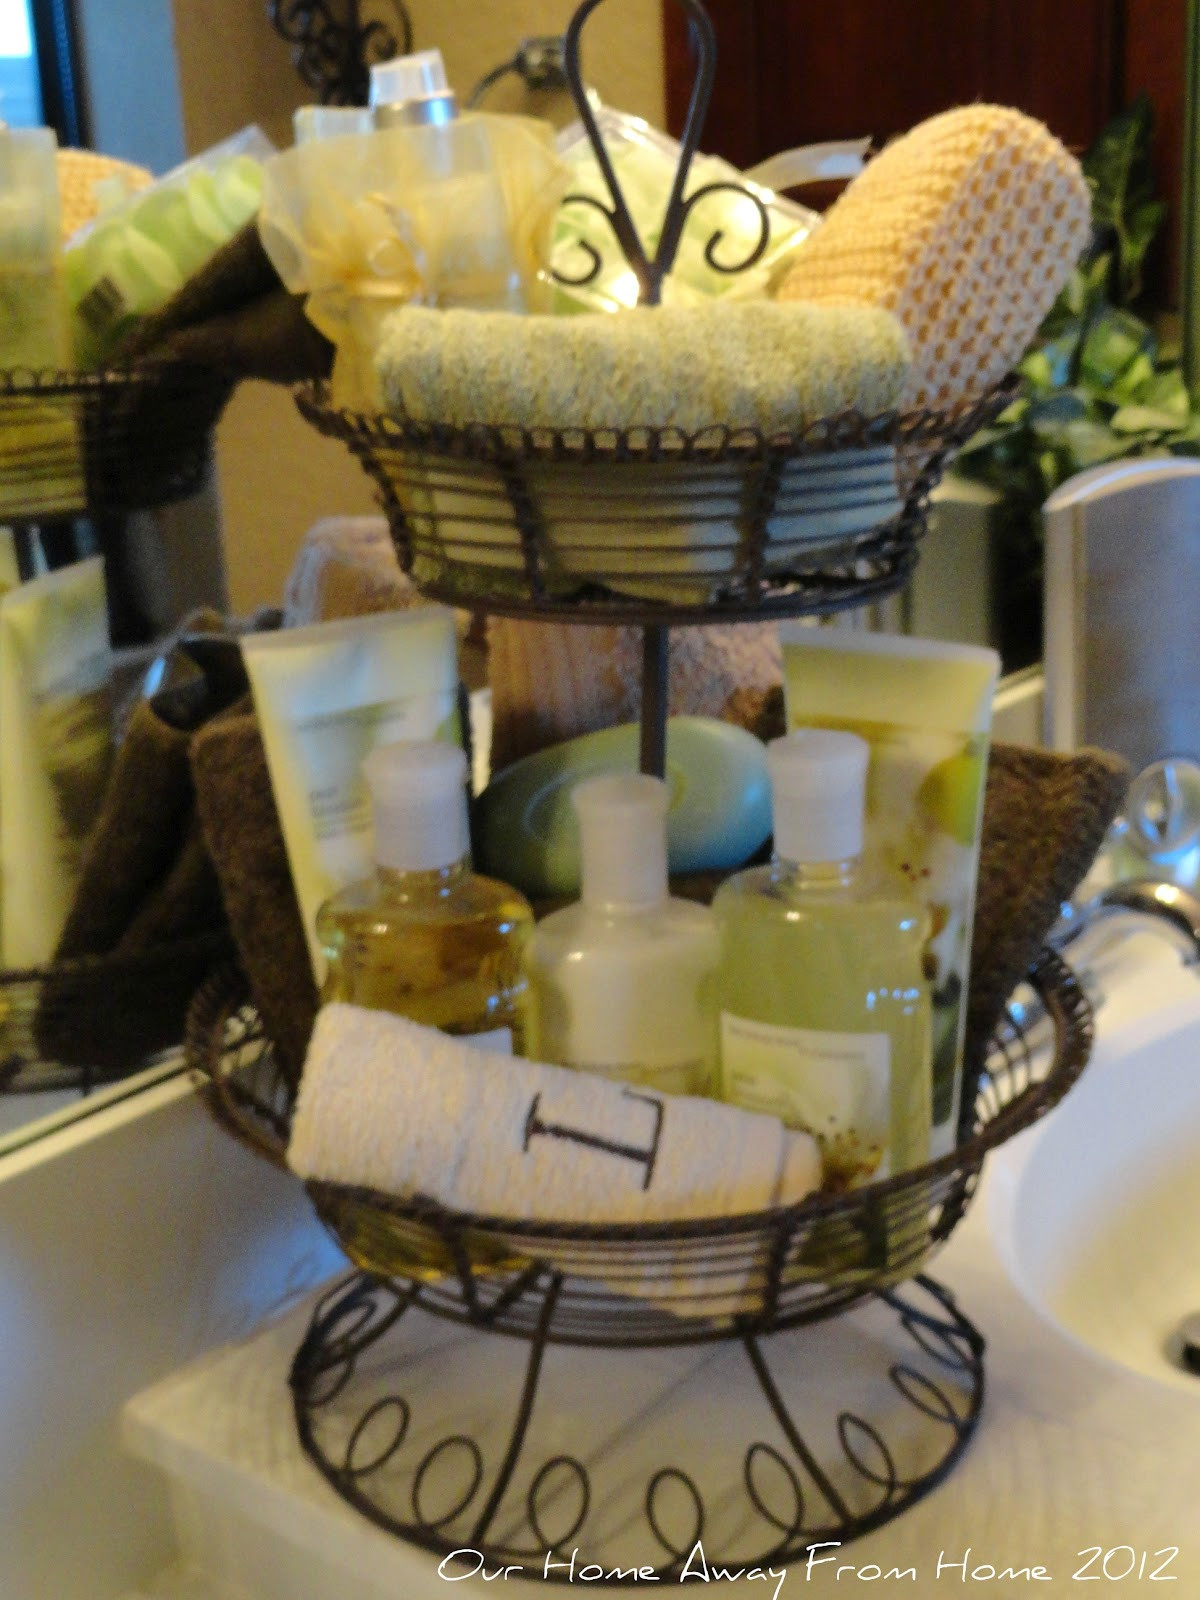 Bath Gift Basket Ideas
 Our Home Away From Home Tiered basket in the bathroom and